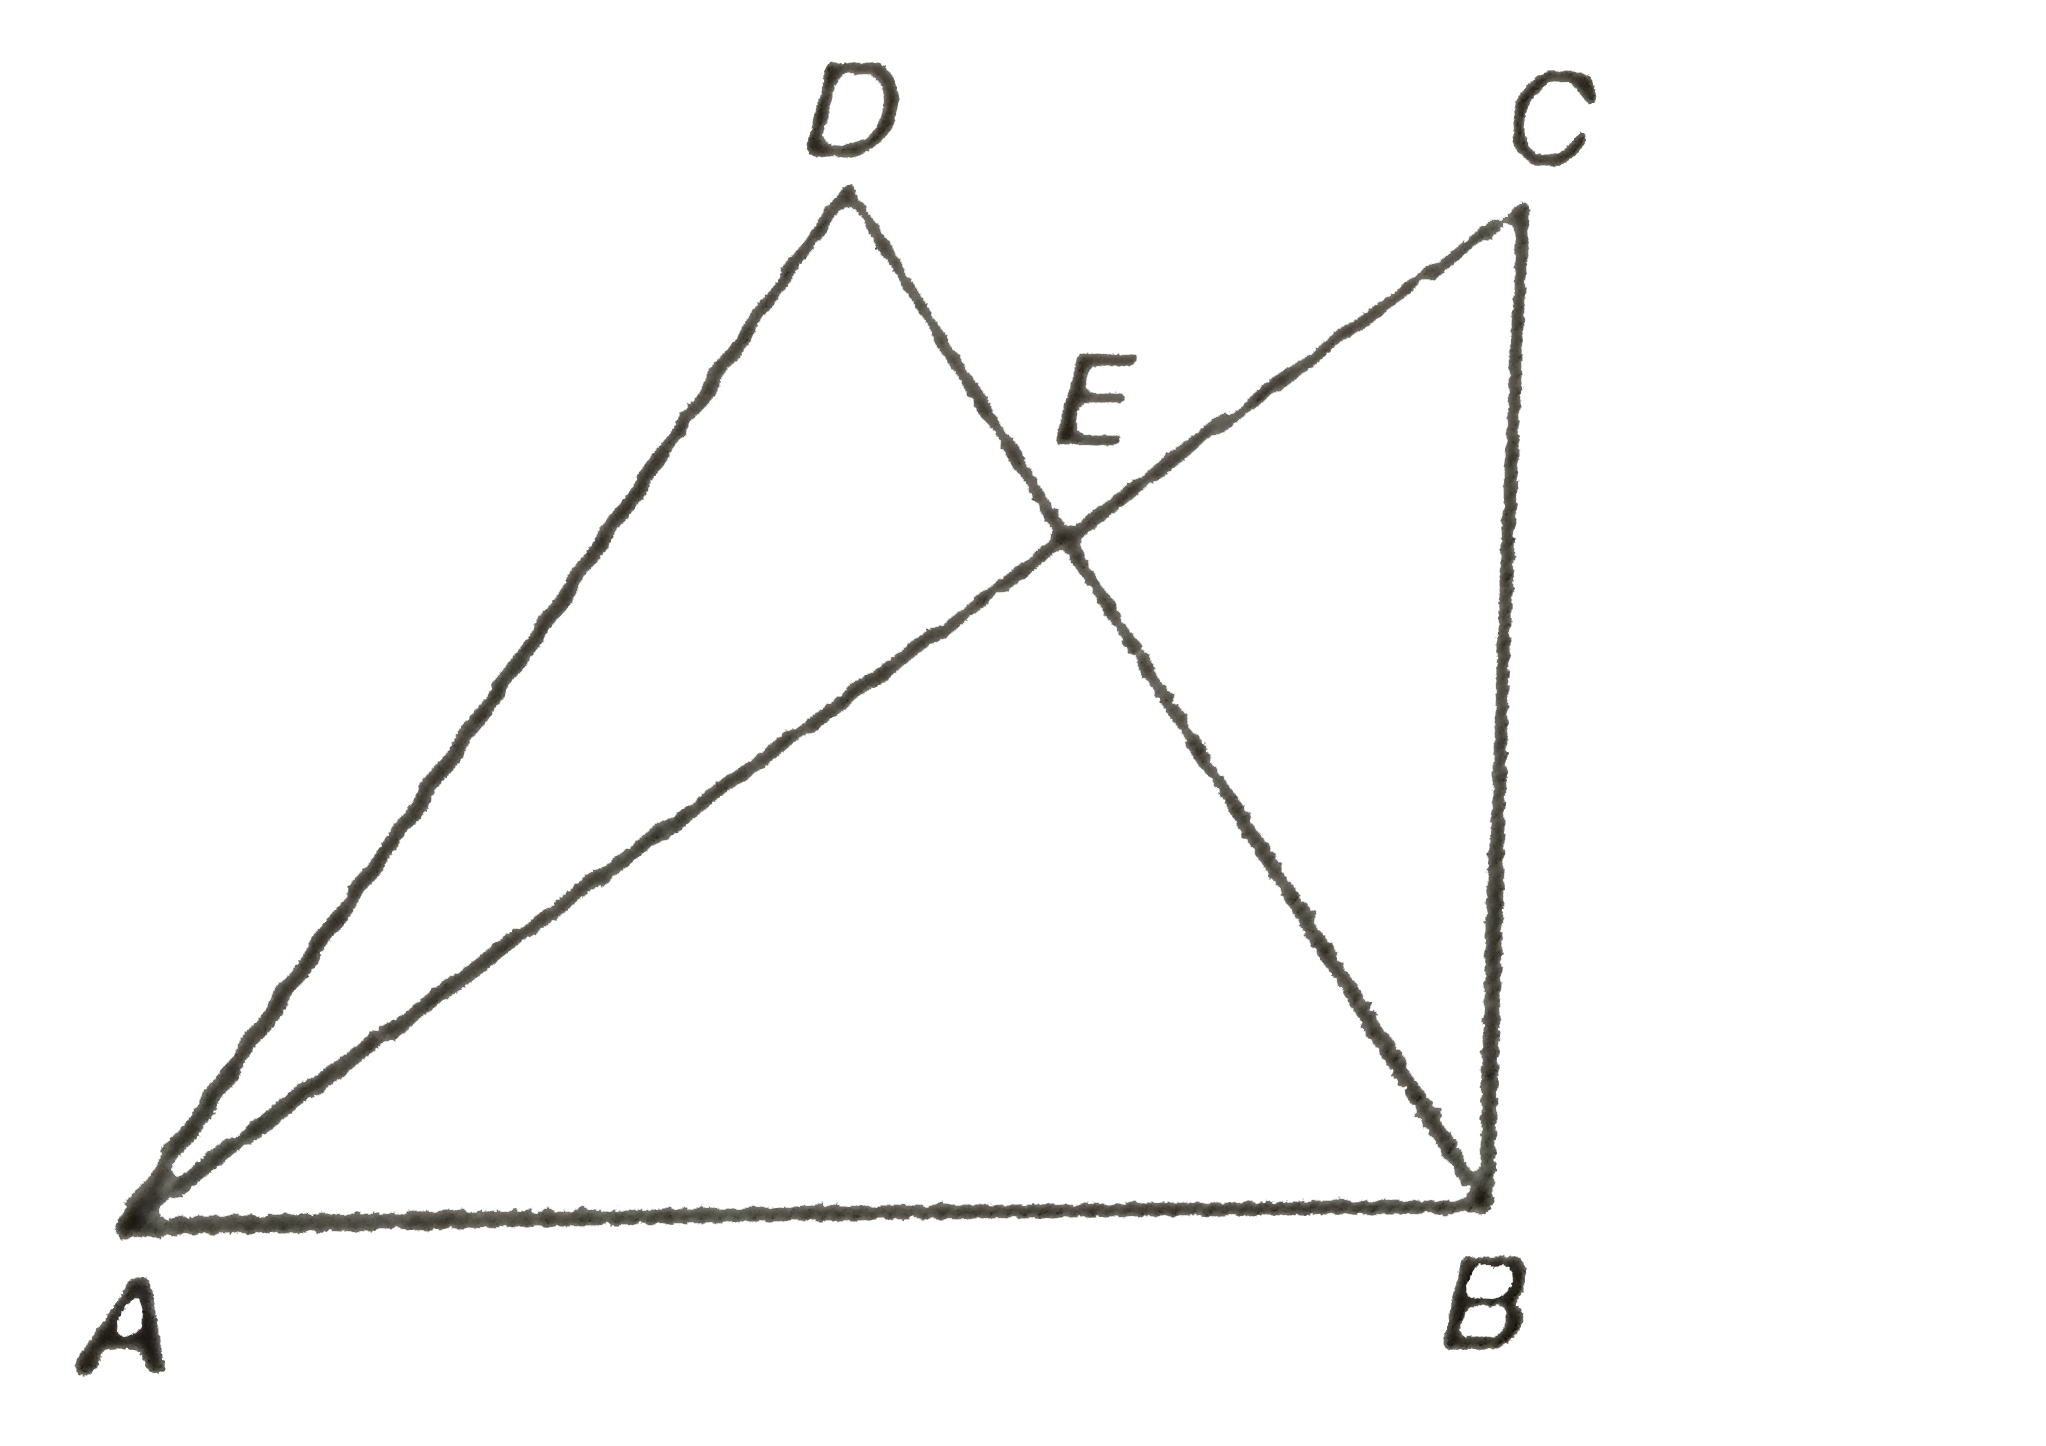 List out all the triangles formed in the figure.